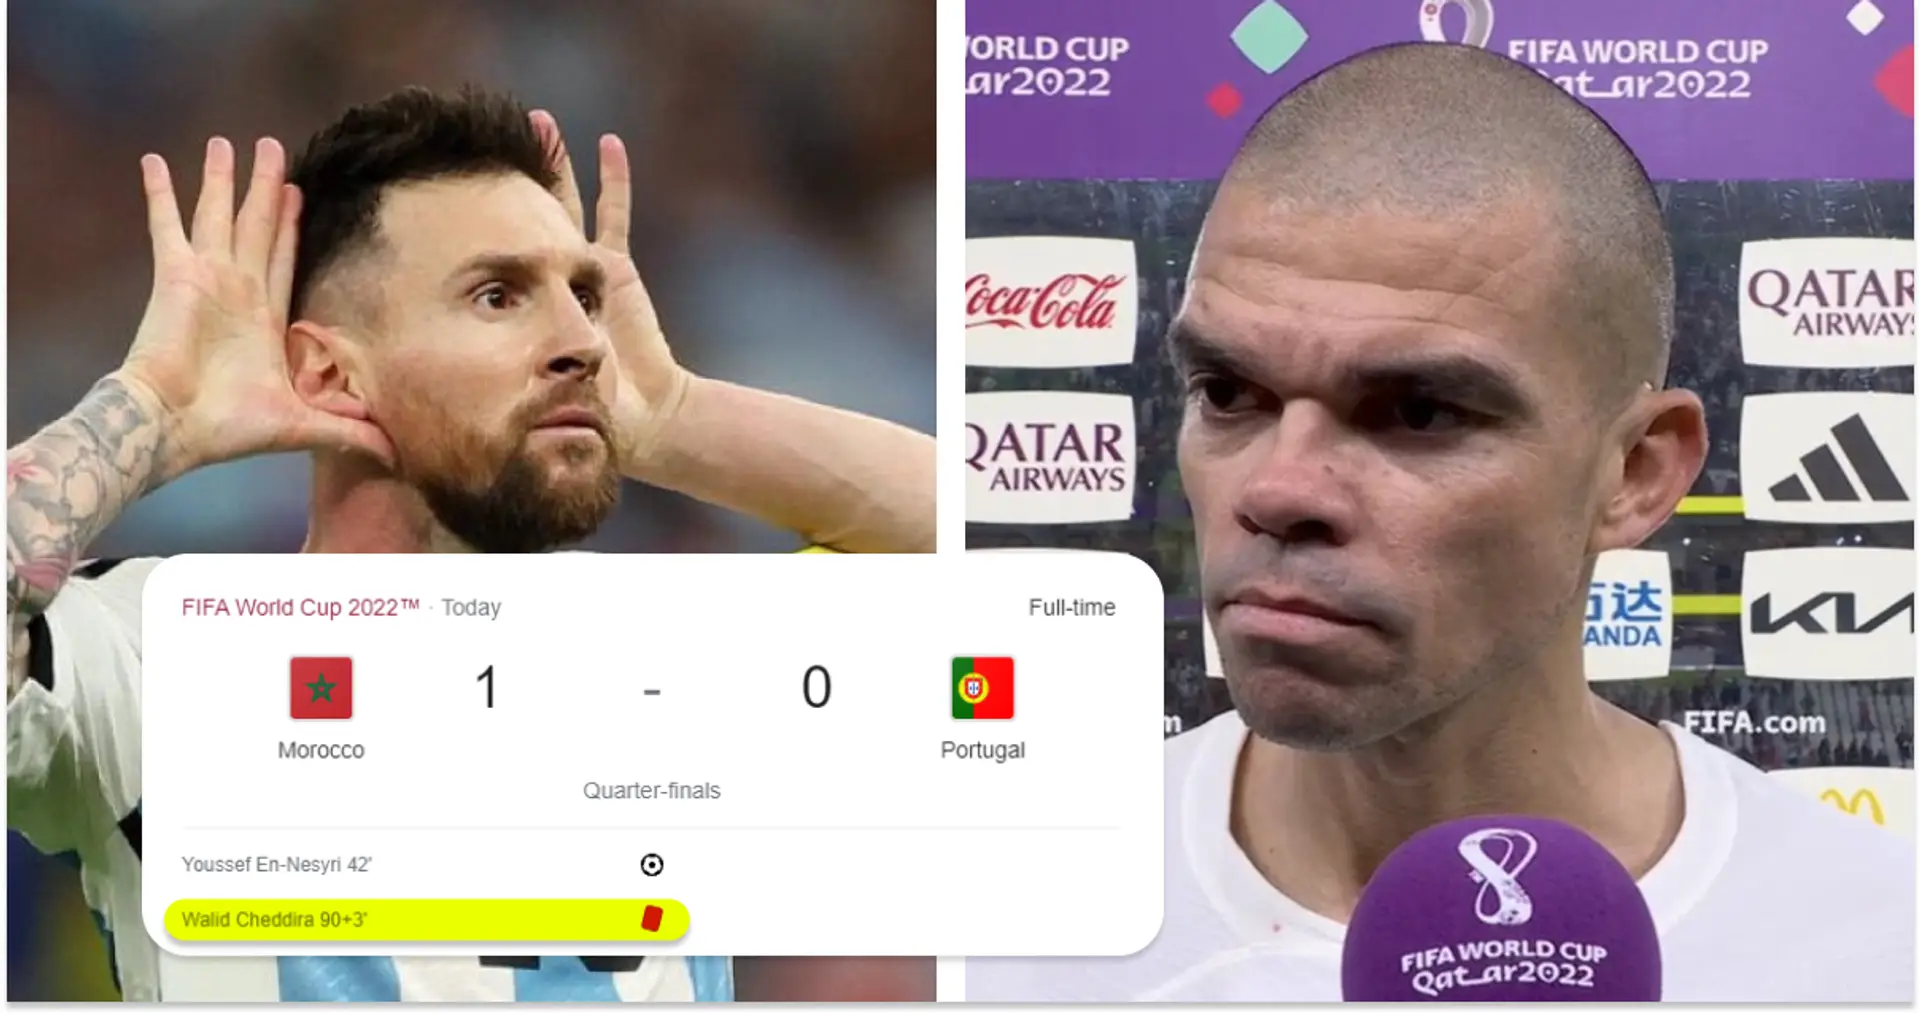 Pepe after Morocco beat Portugal: 'Inadmissible to have Argentinian referee for our game. They can give Messi trophy now'